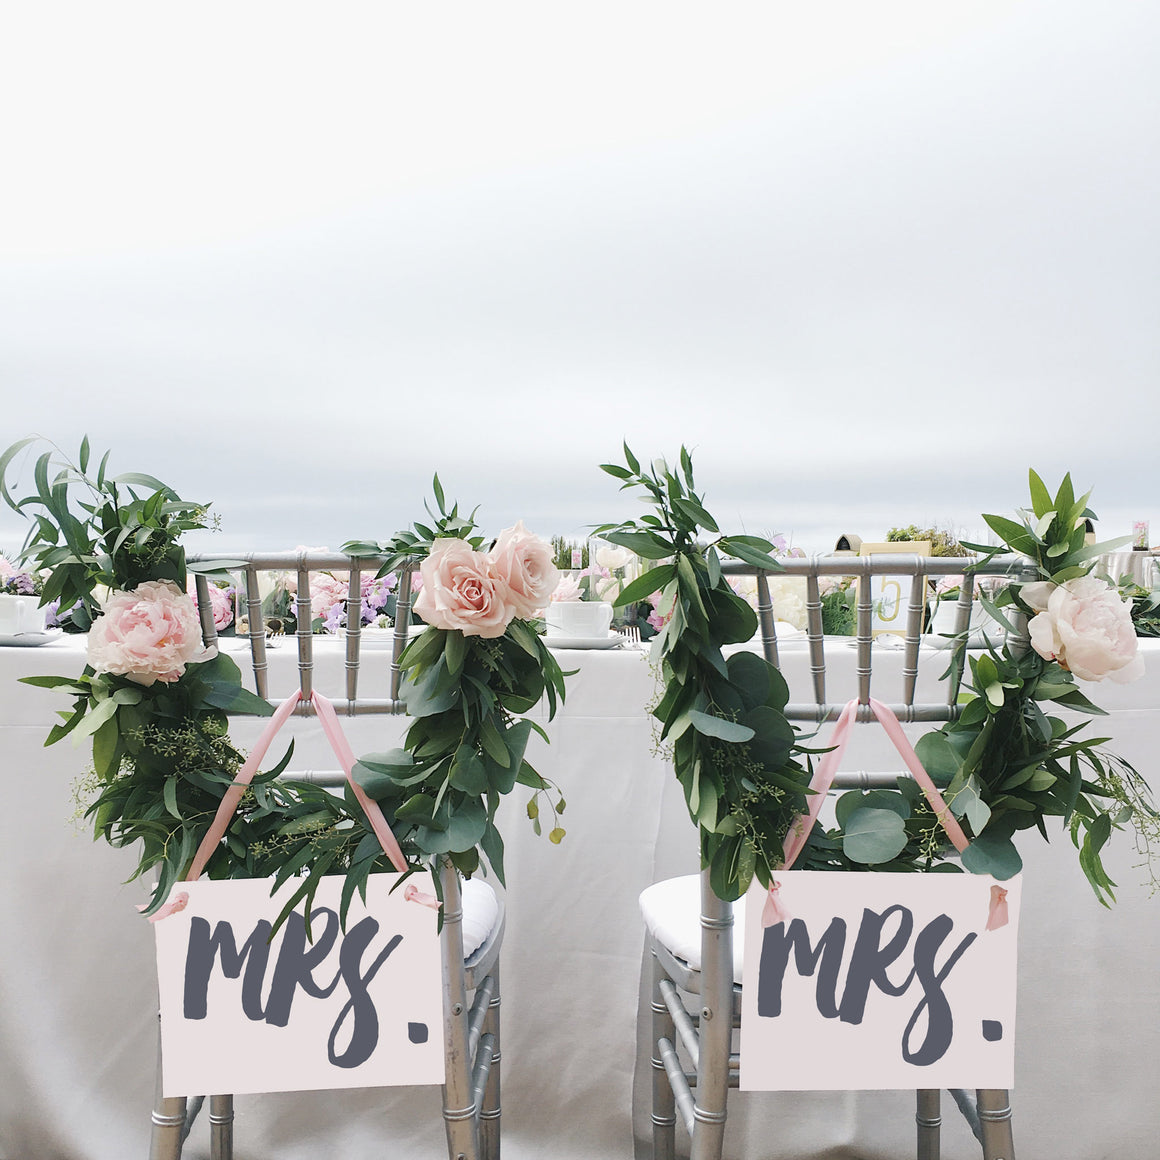 Mrs. & Mrs. Chair Banners | Set of 2